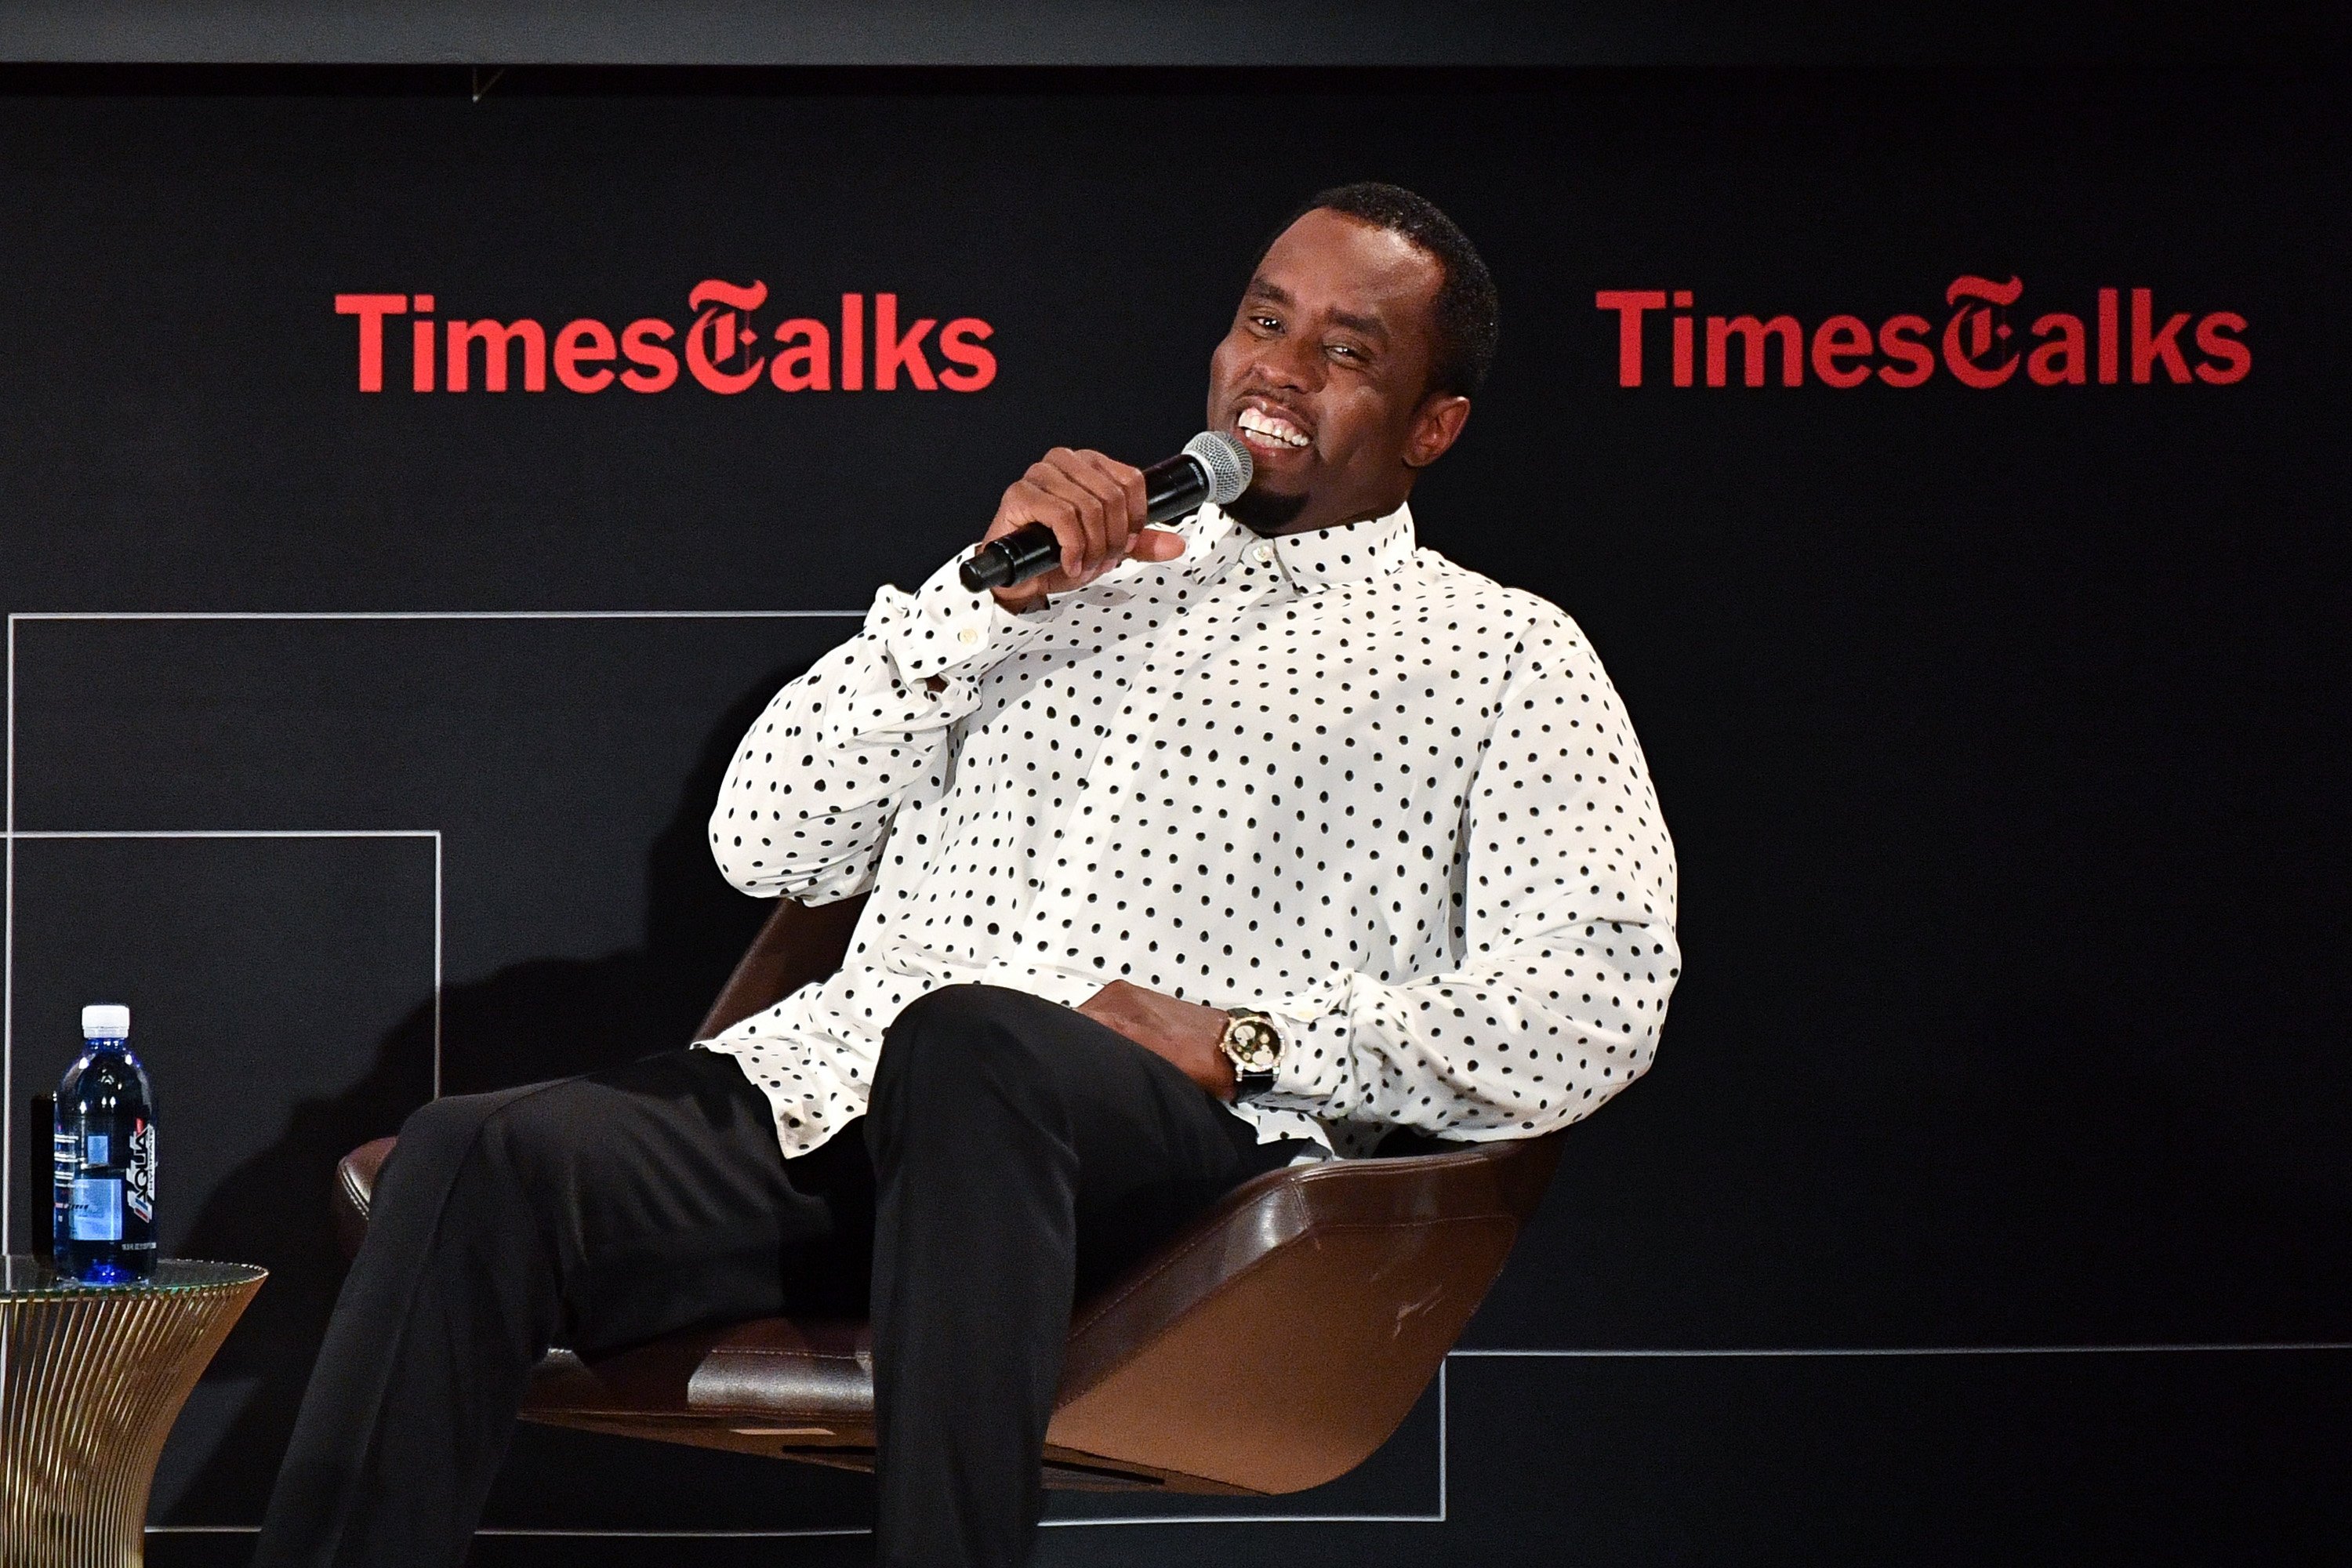 Sean "Diddy" Combs at TimesTalks Presents: An Evening with Sean "Diddy" Combs on September 20, 2017. | Photo: Getty Images